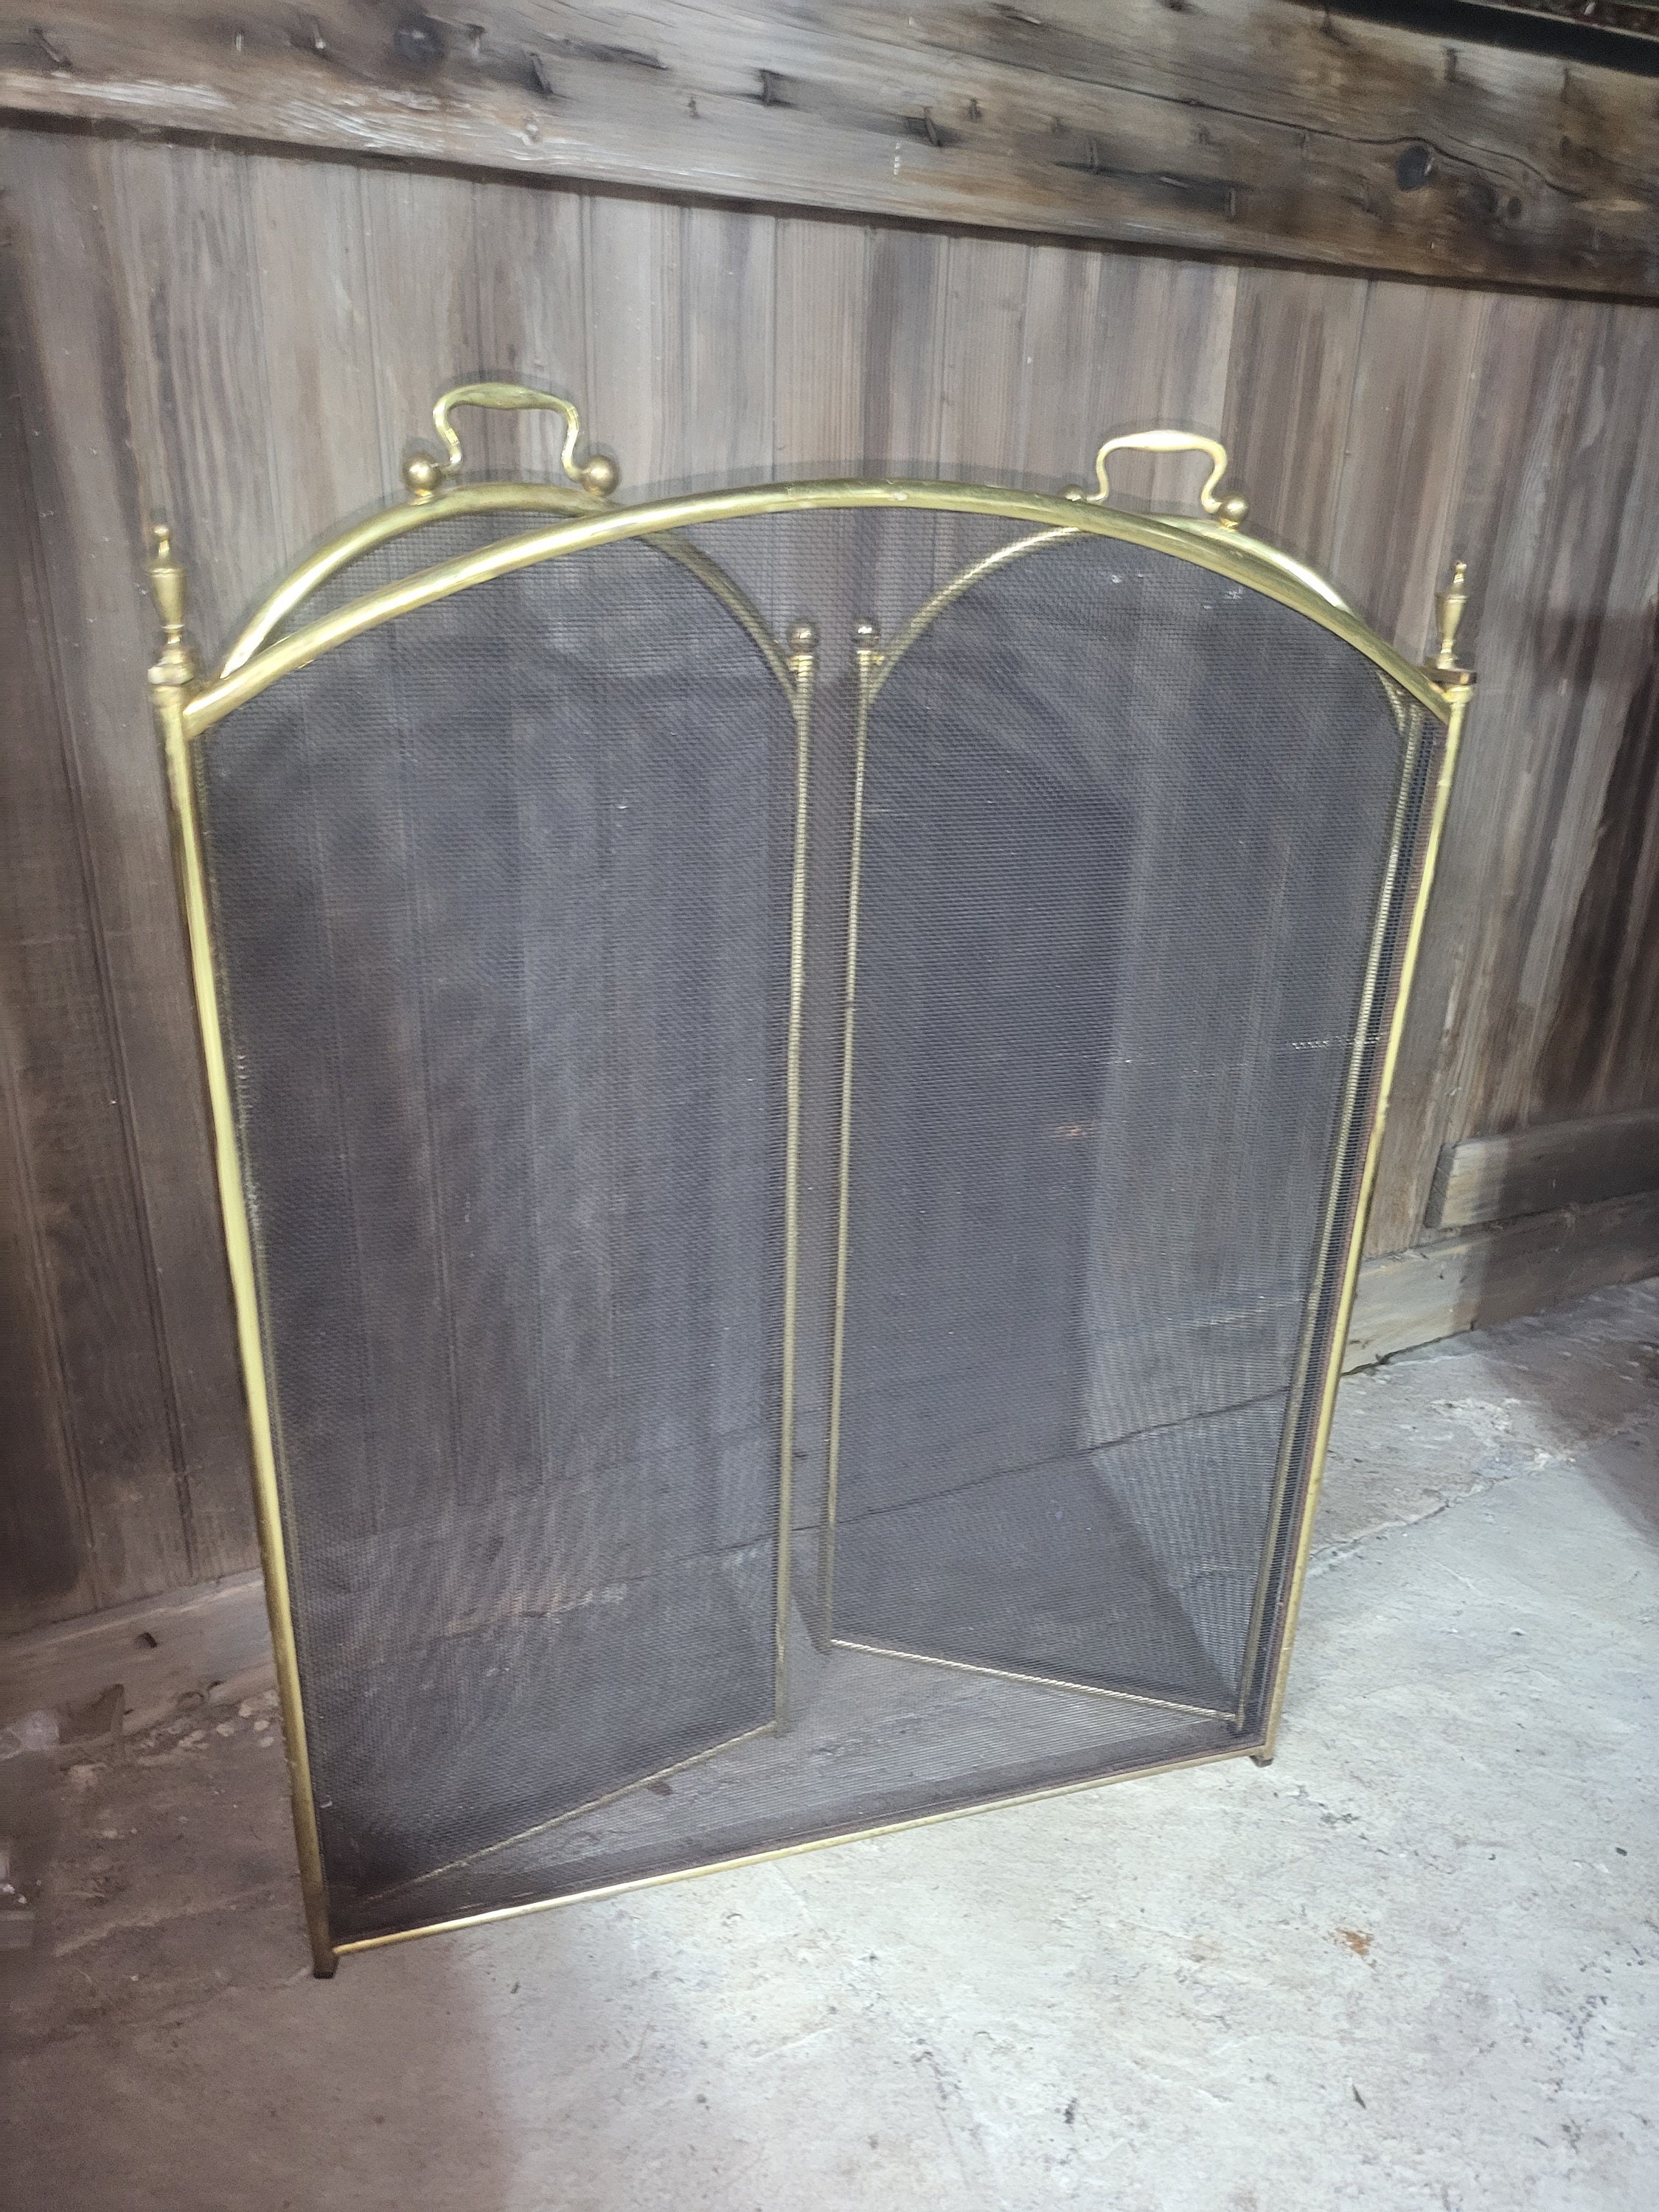 1/2 Inch Brass Pipe Screens Heavy Duty, Free Shipping, Made in the USA 